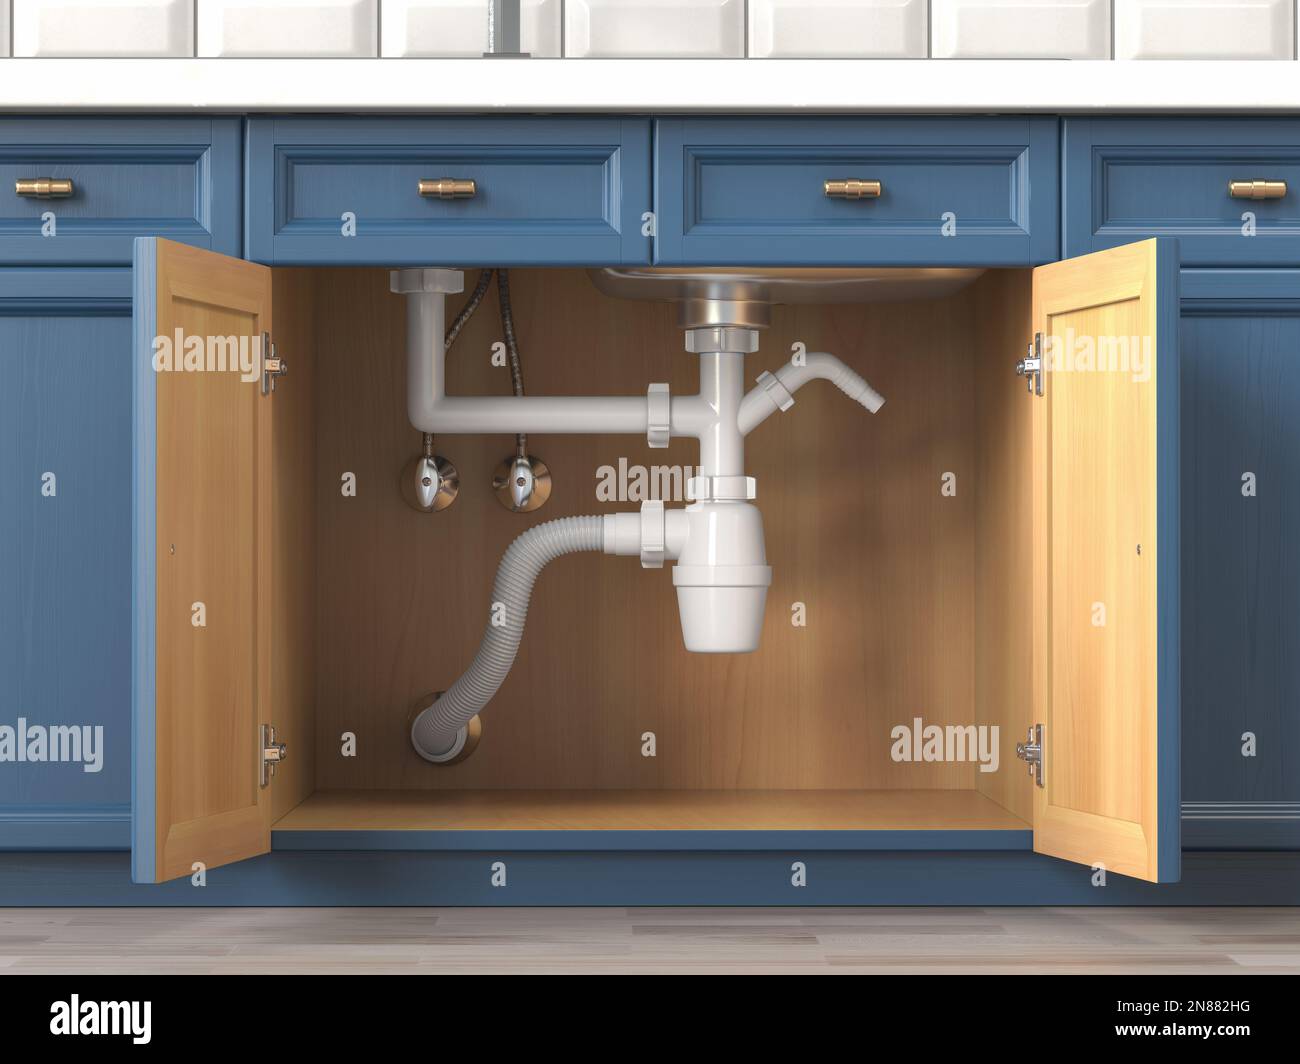 Siphon and pipes under the sink in the kitchen. 3d illustration Stock Photo